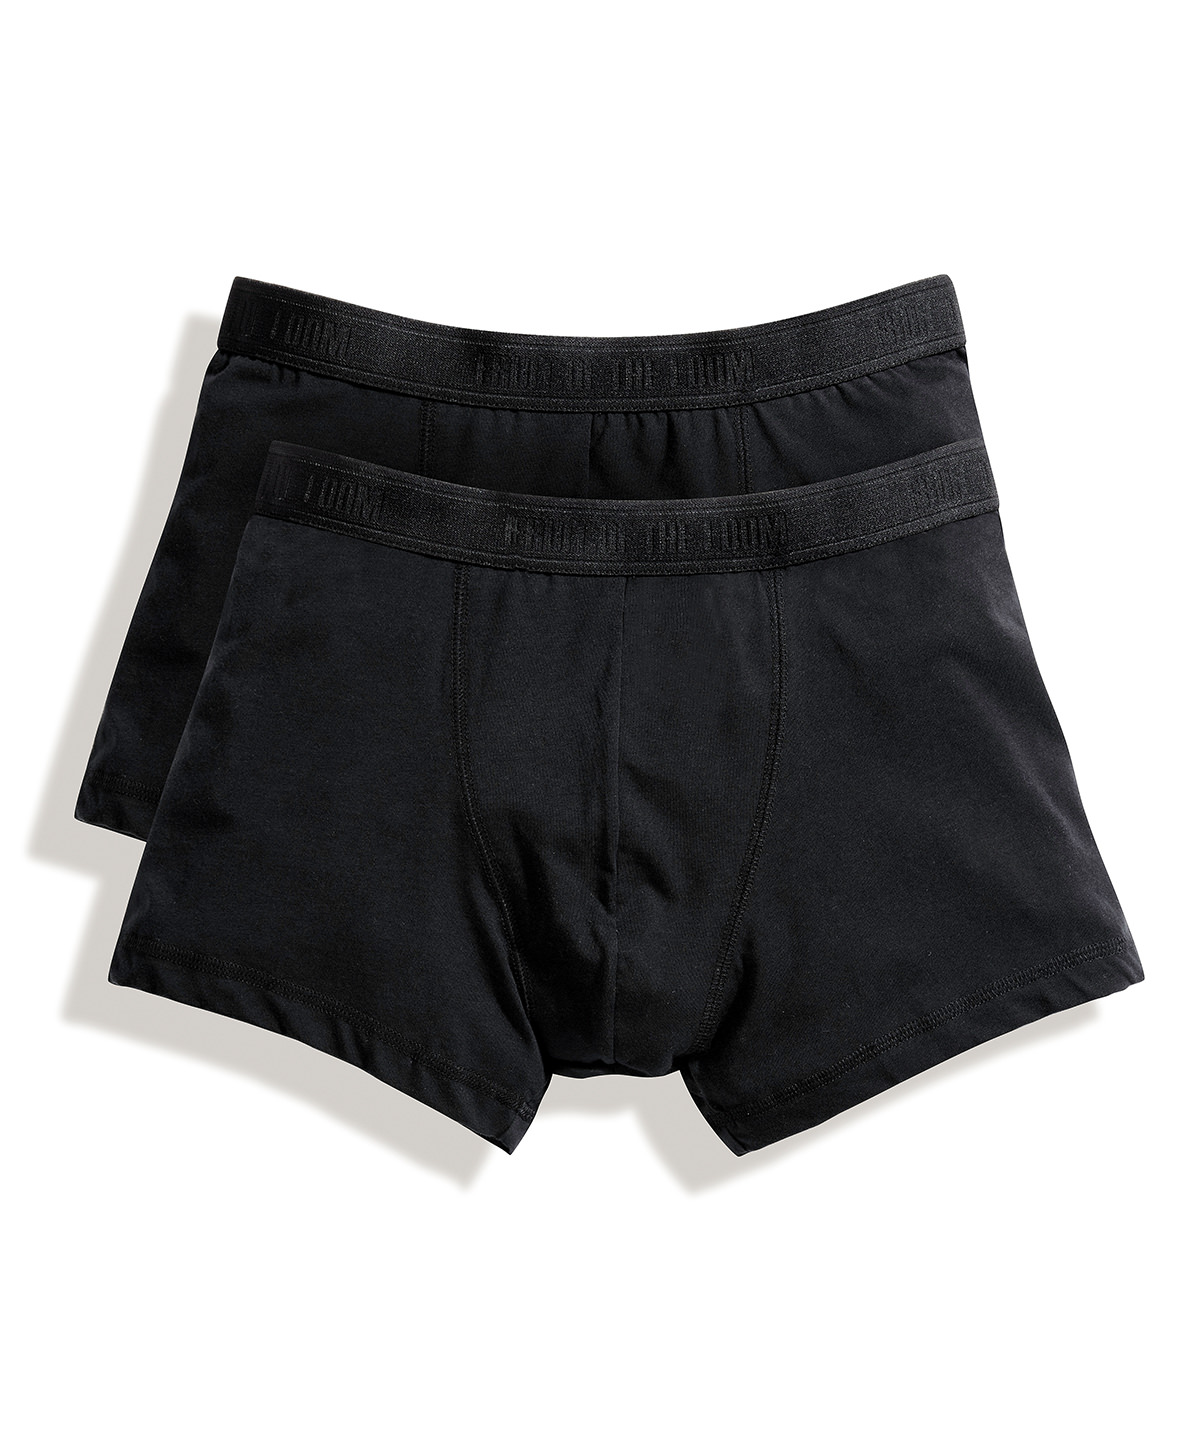 Classic Shorty 2-Pack Black Size Small